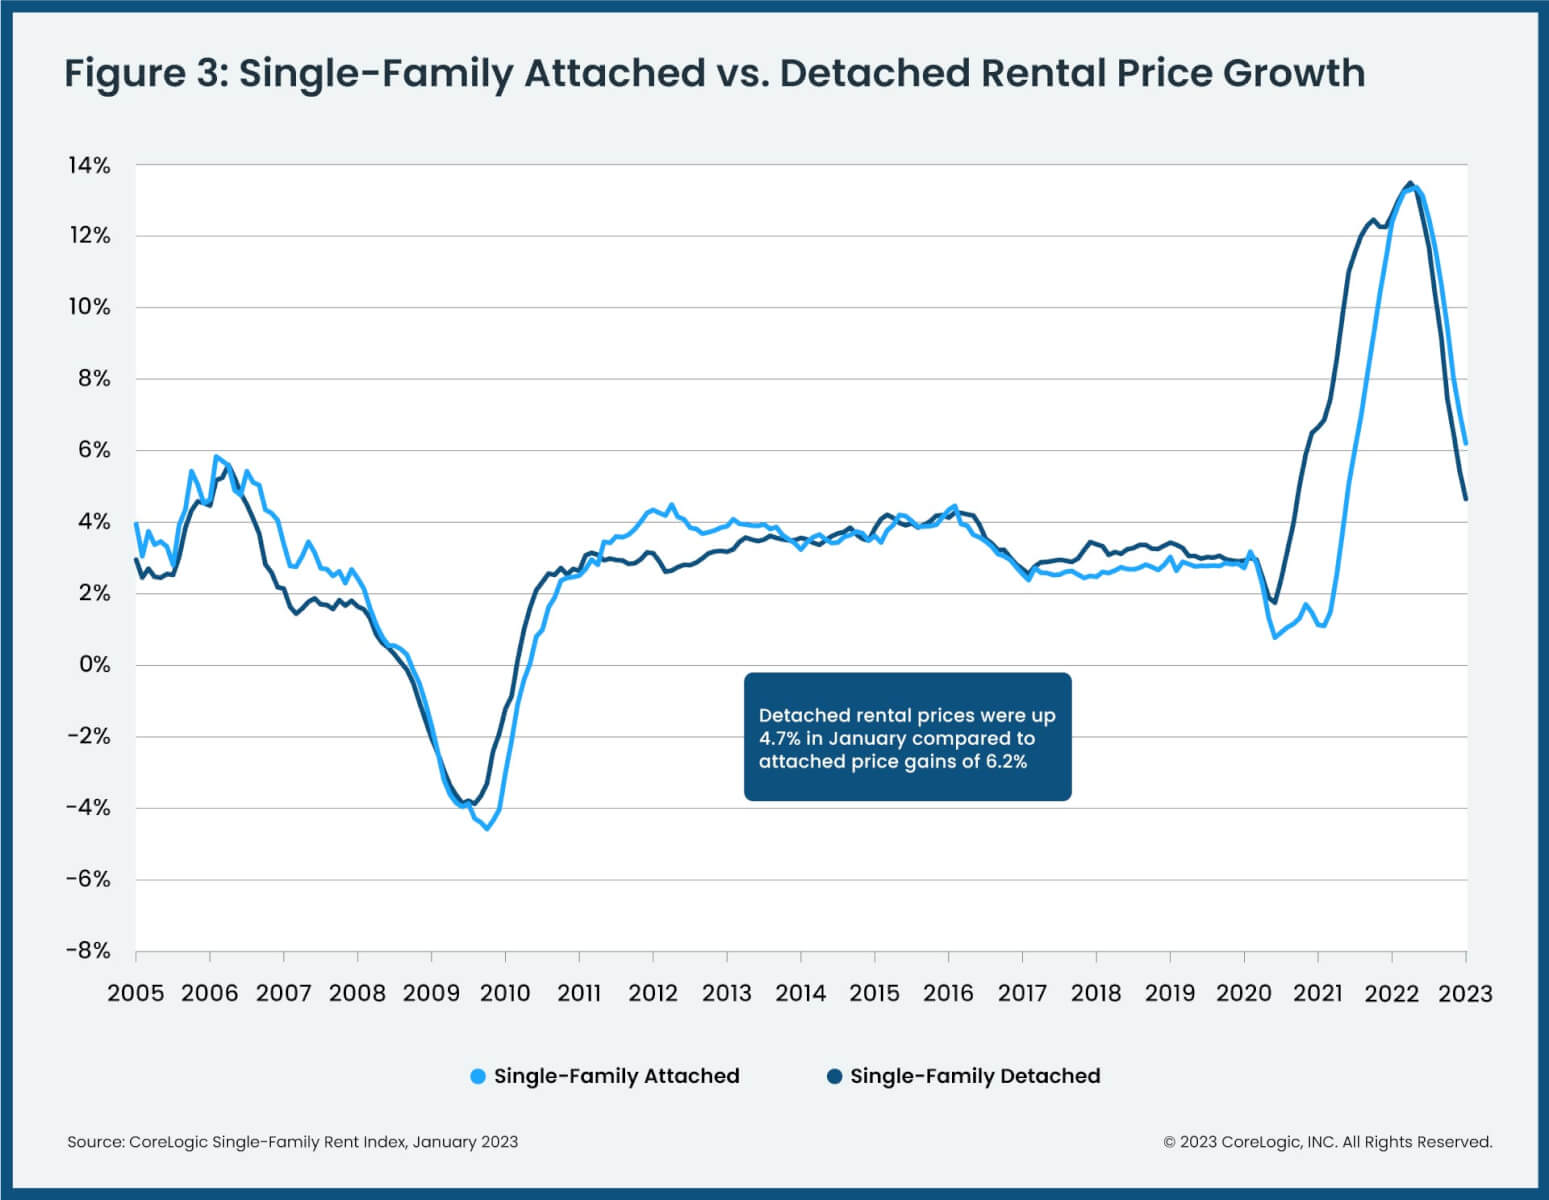 Attached versus detached single-family rental price changes